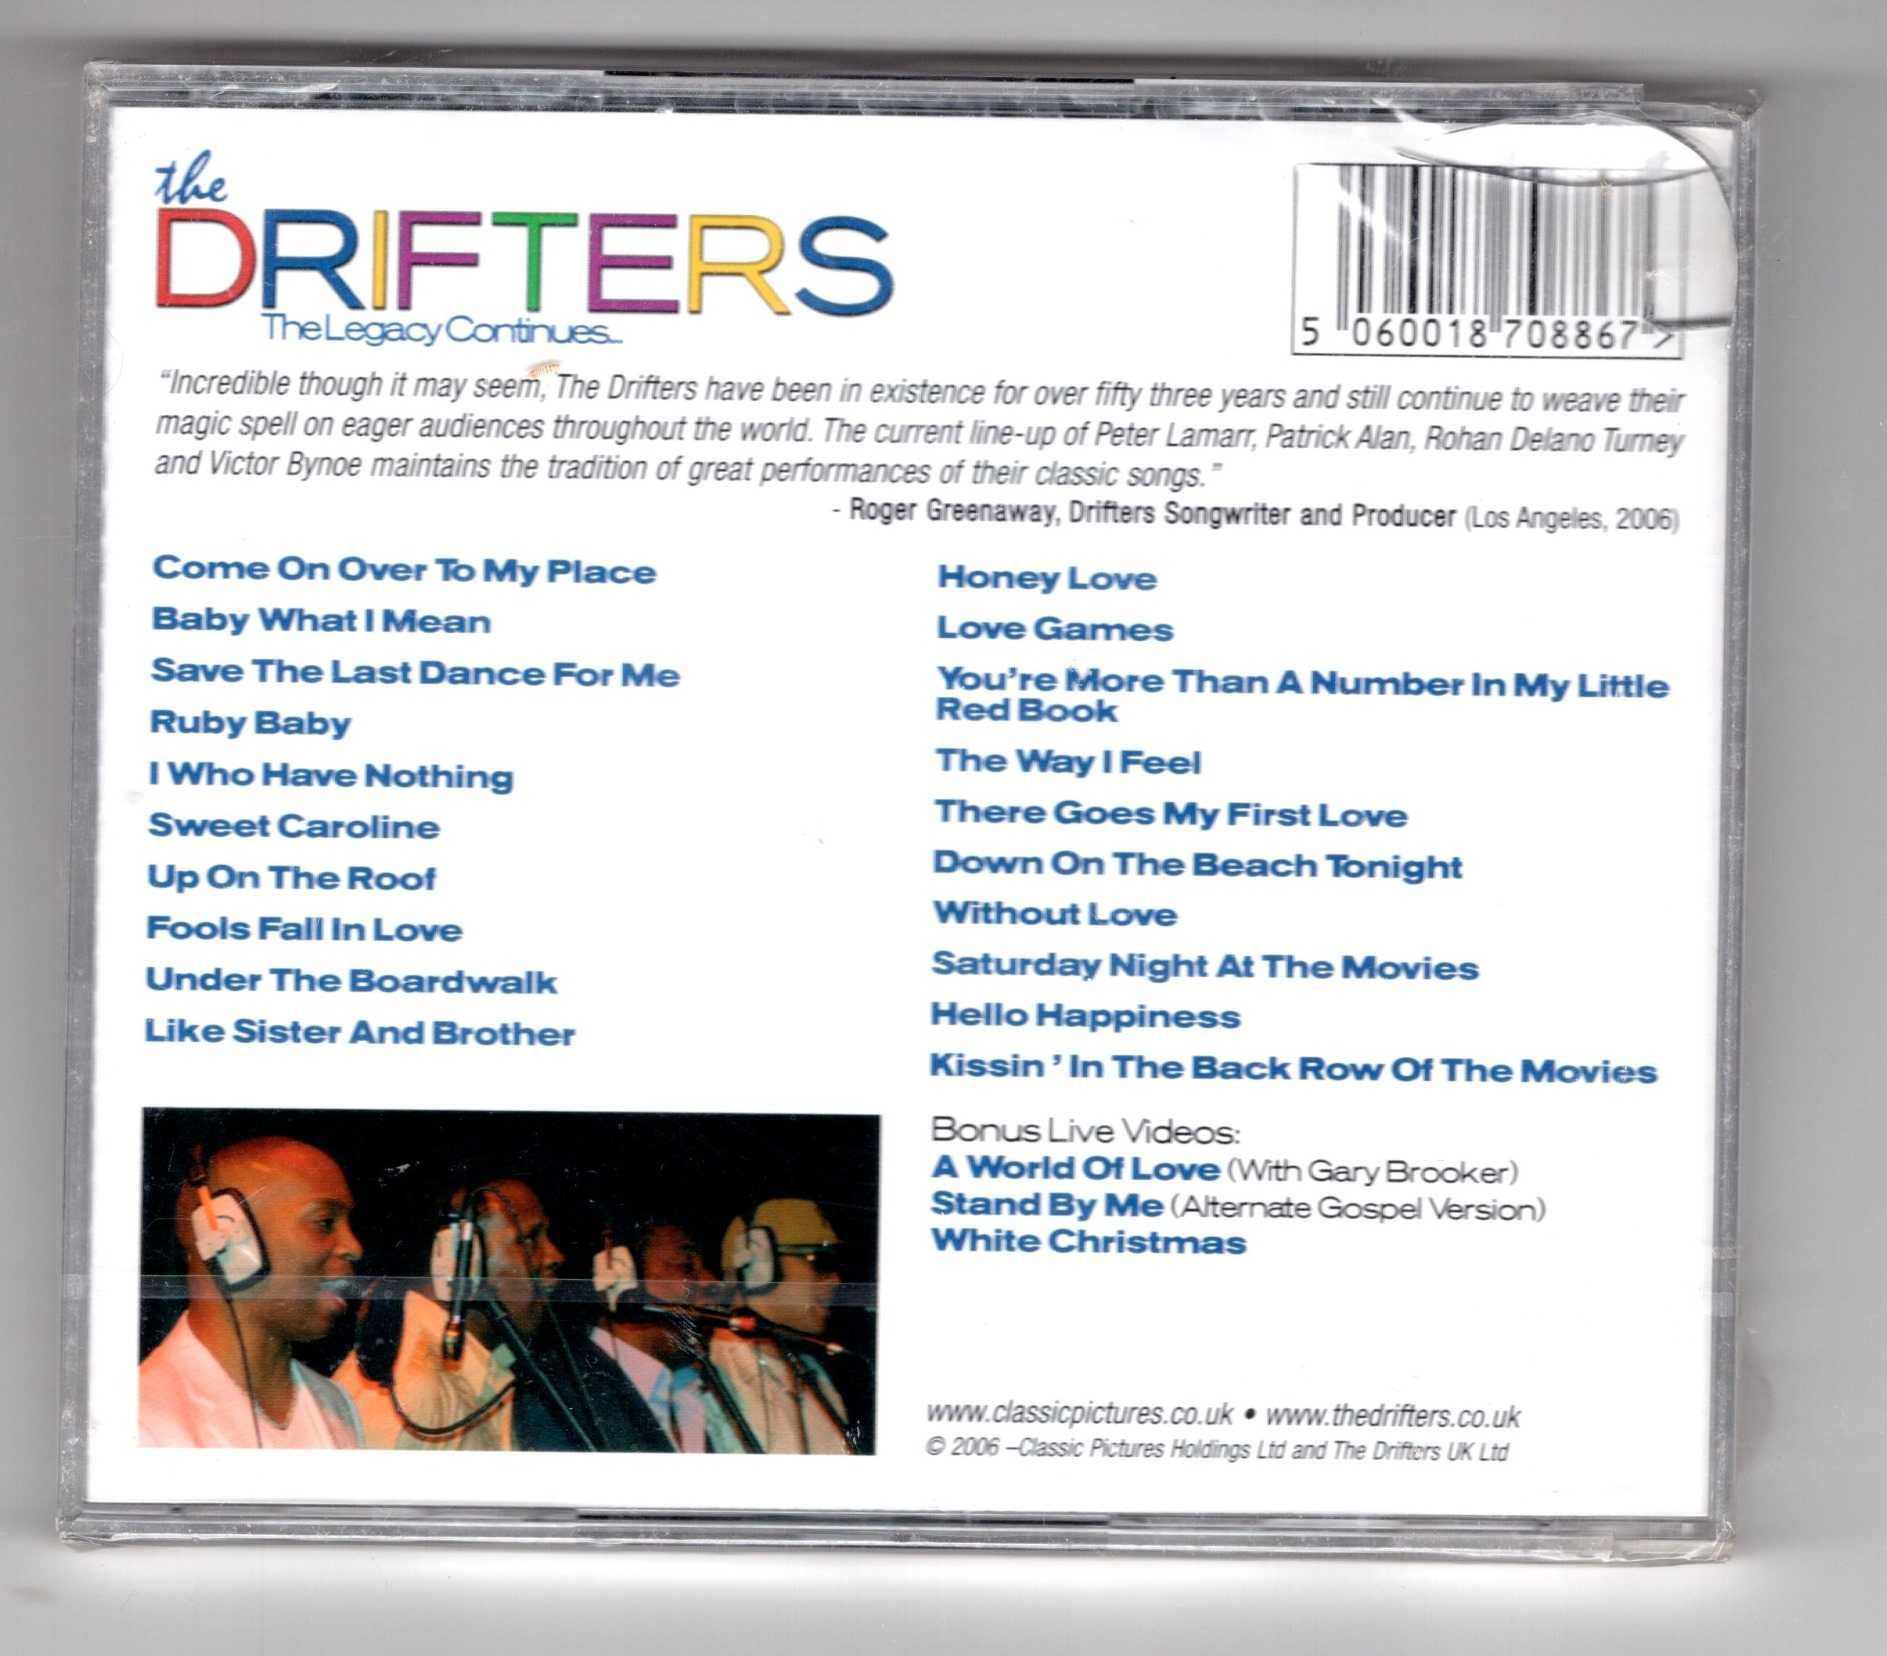 The Drifters - The Legacy Continues (CD)